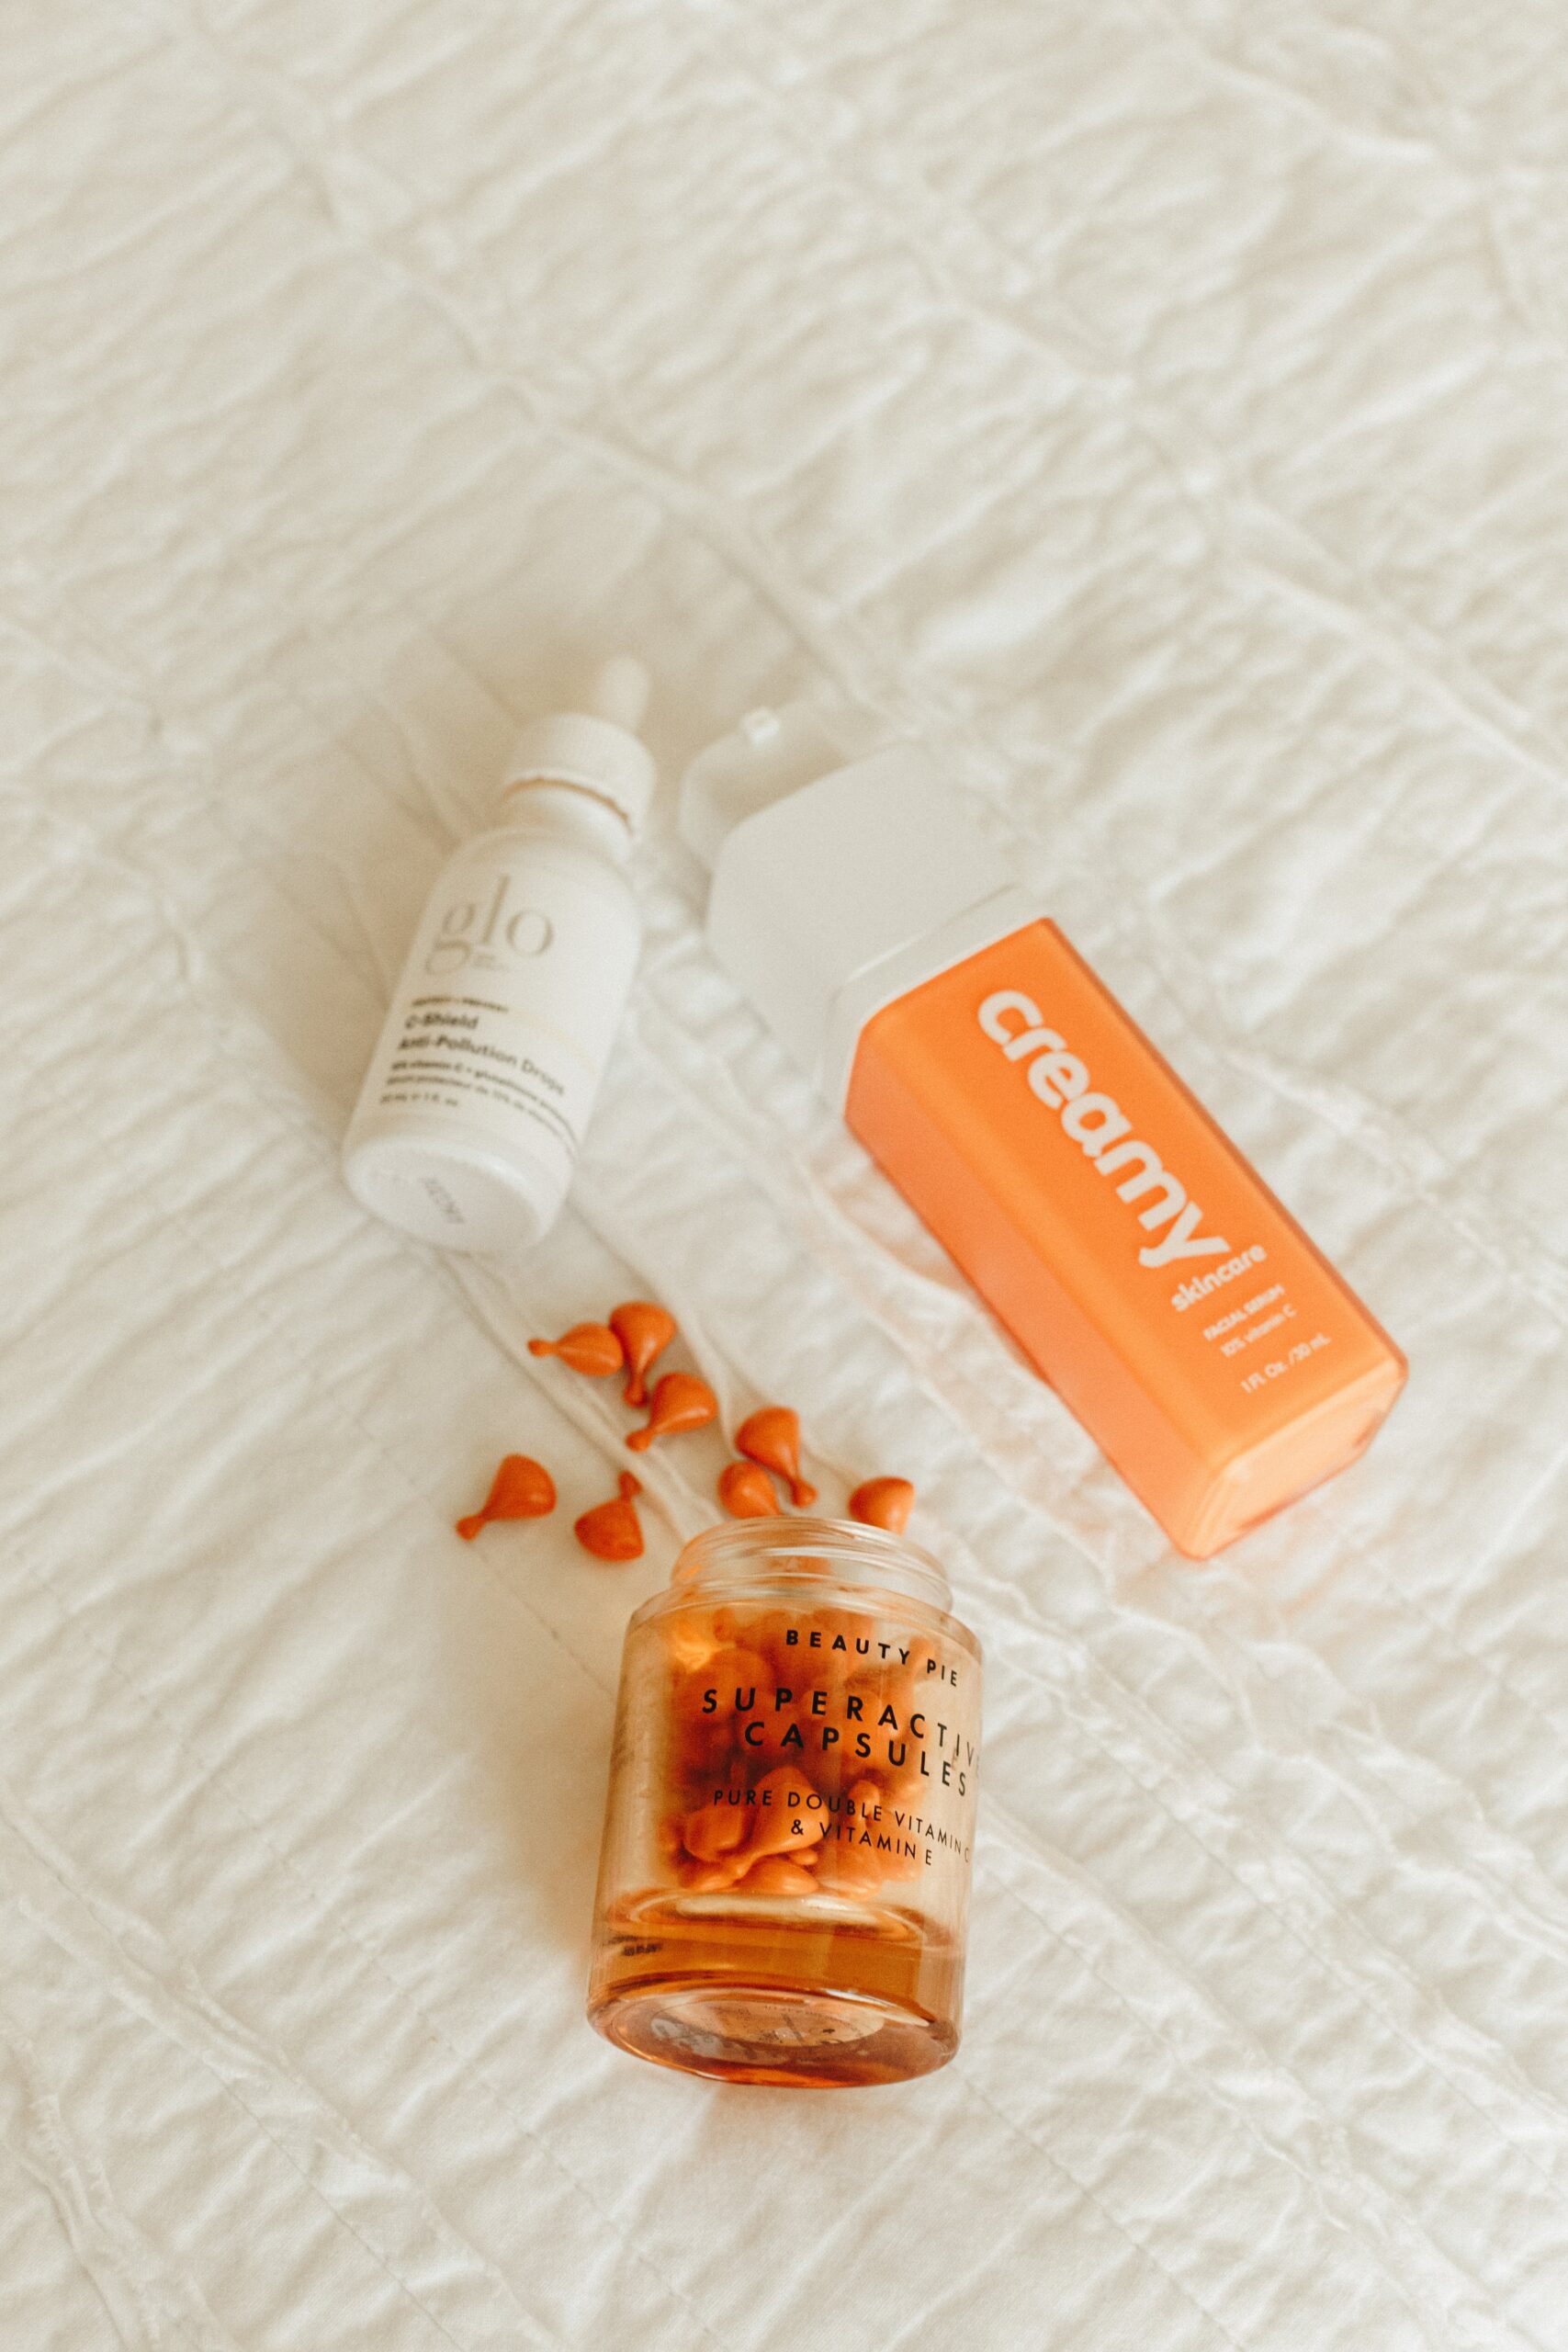 What is a good vitamin c serum to start with